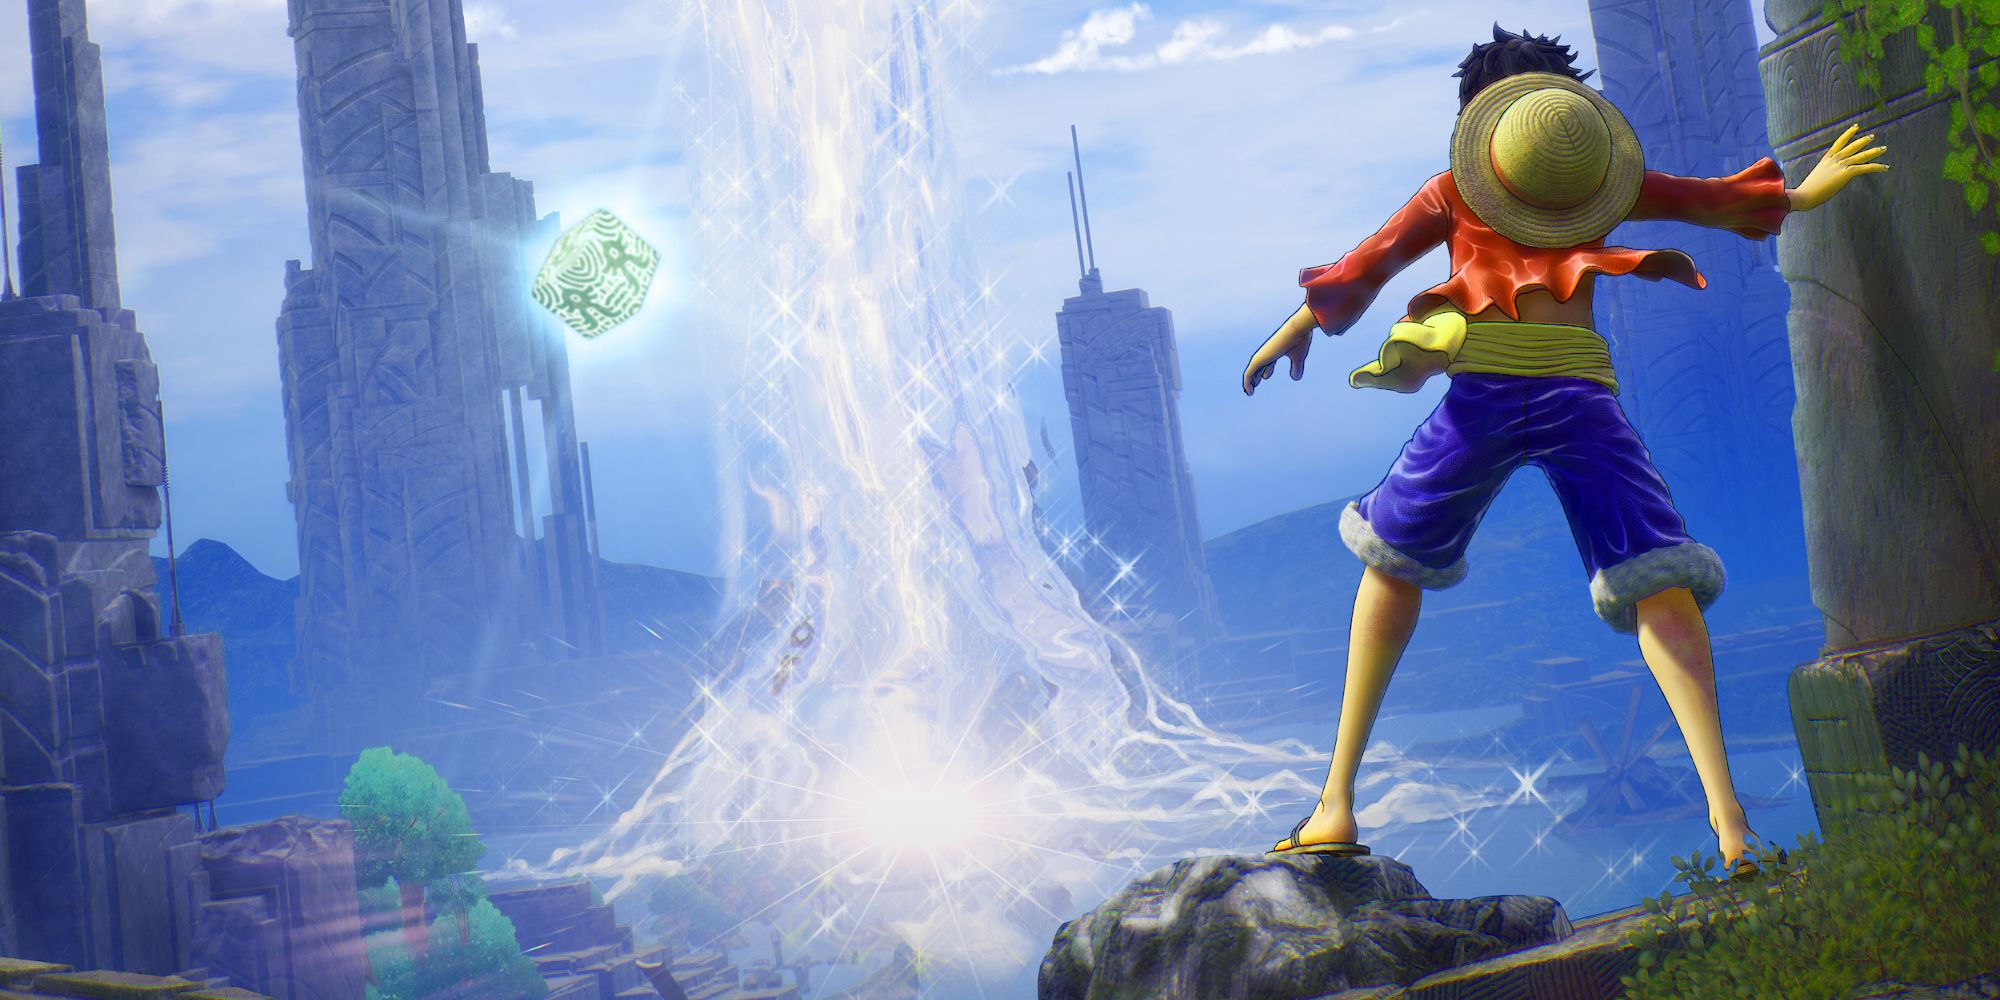 Luffy is standing on a cliff that's facing a mysterious glowing cube and a series of large stone structures formed around a sparkling blast of water shooting toward the sky.